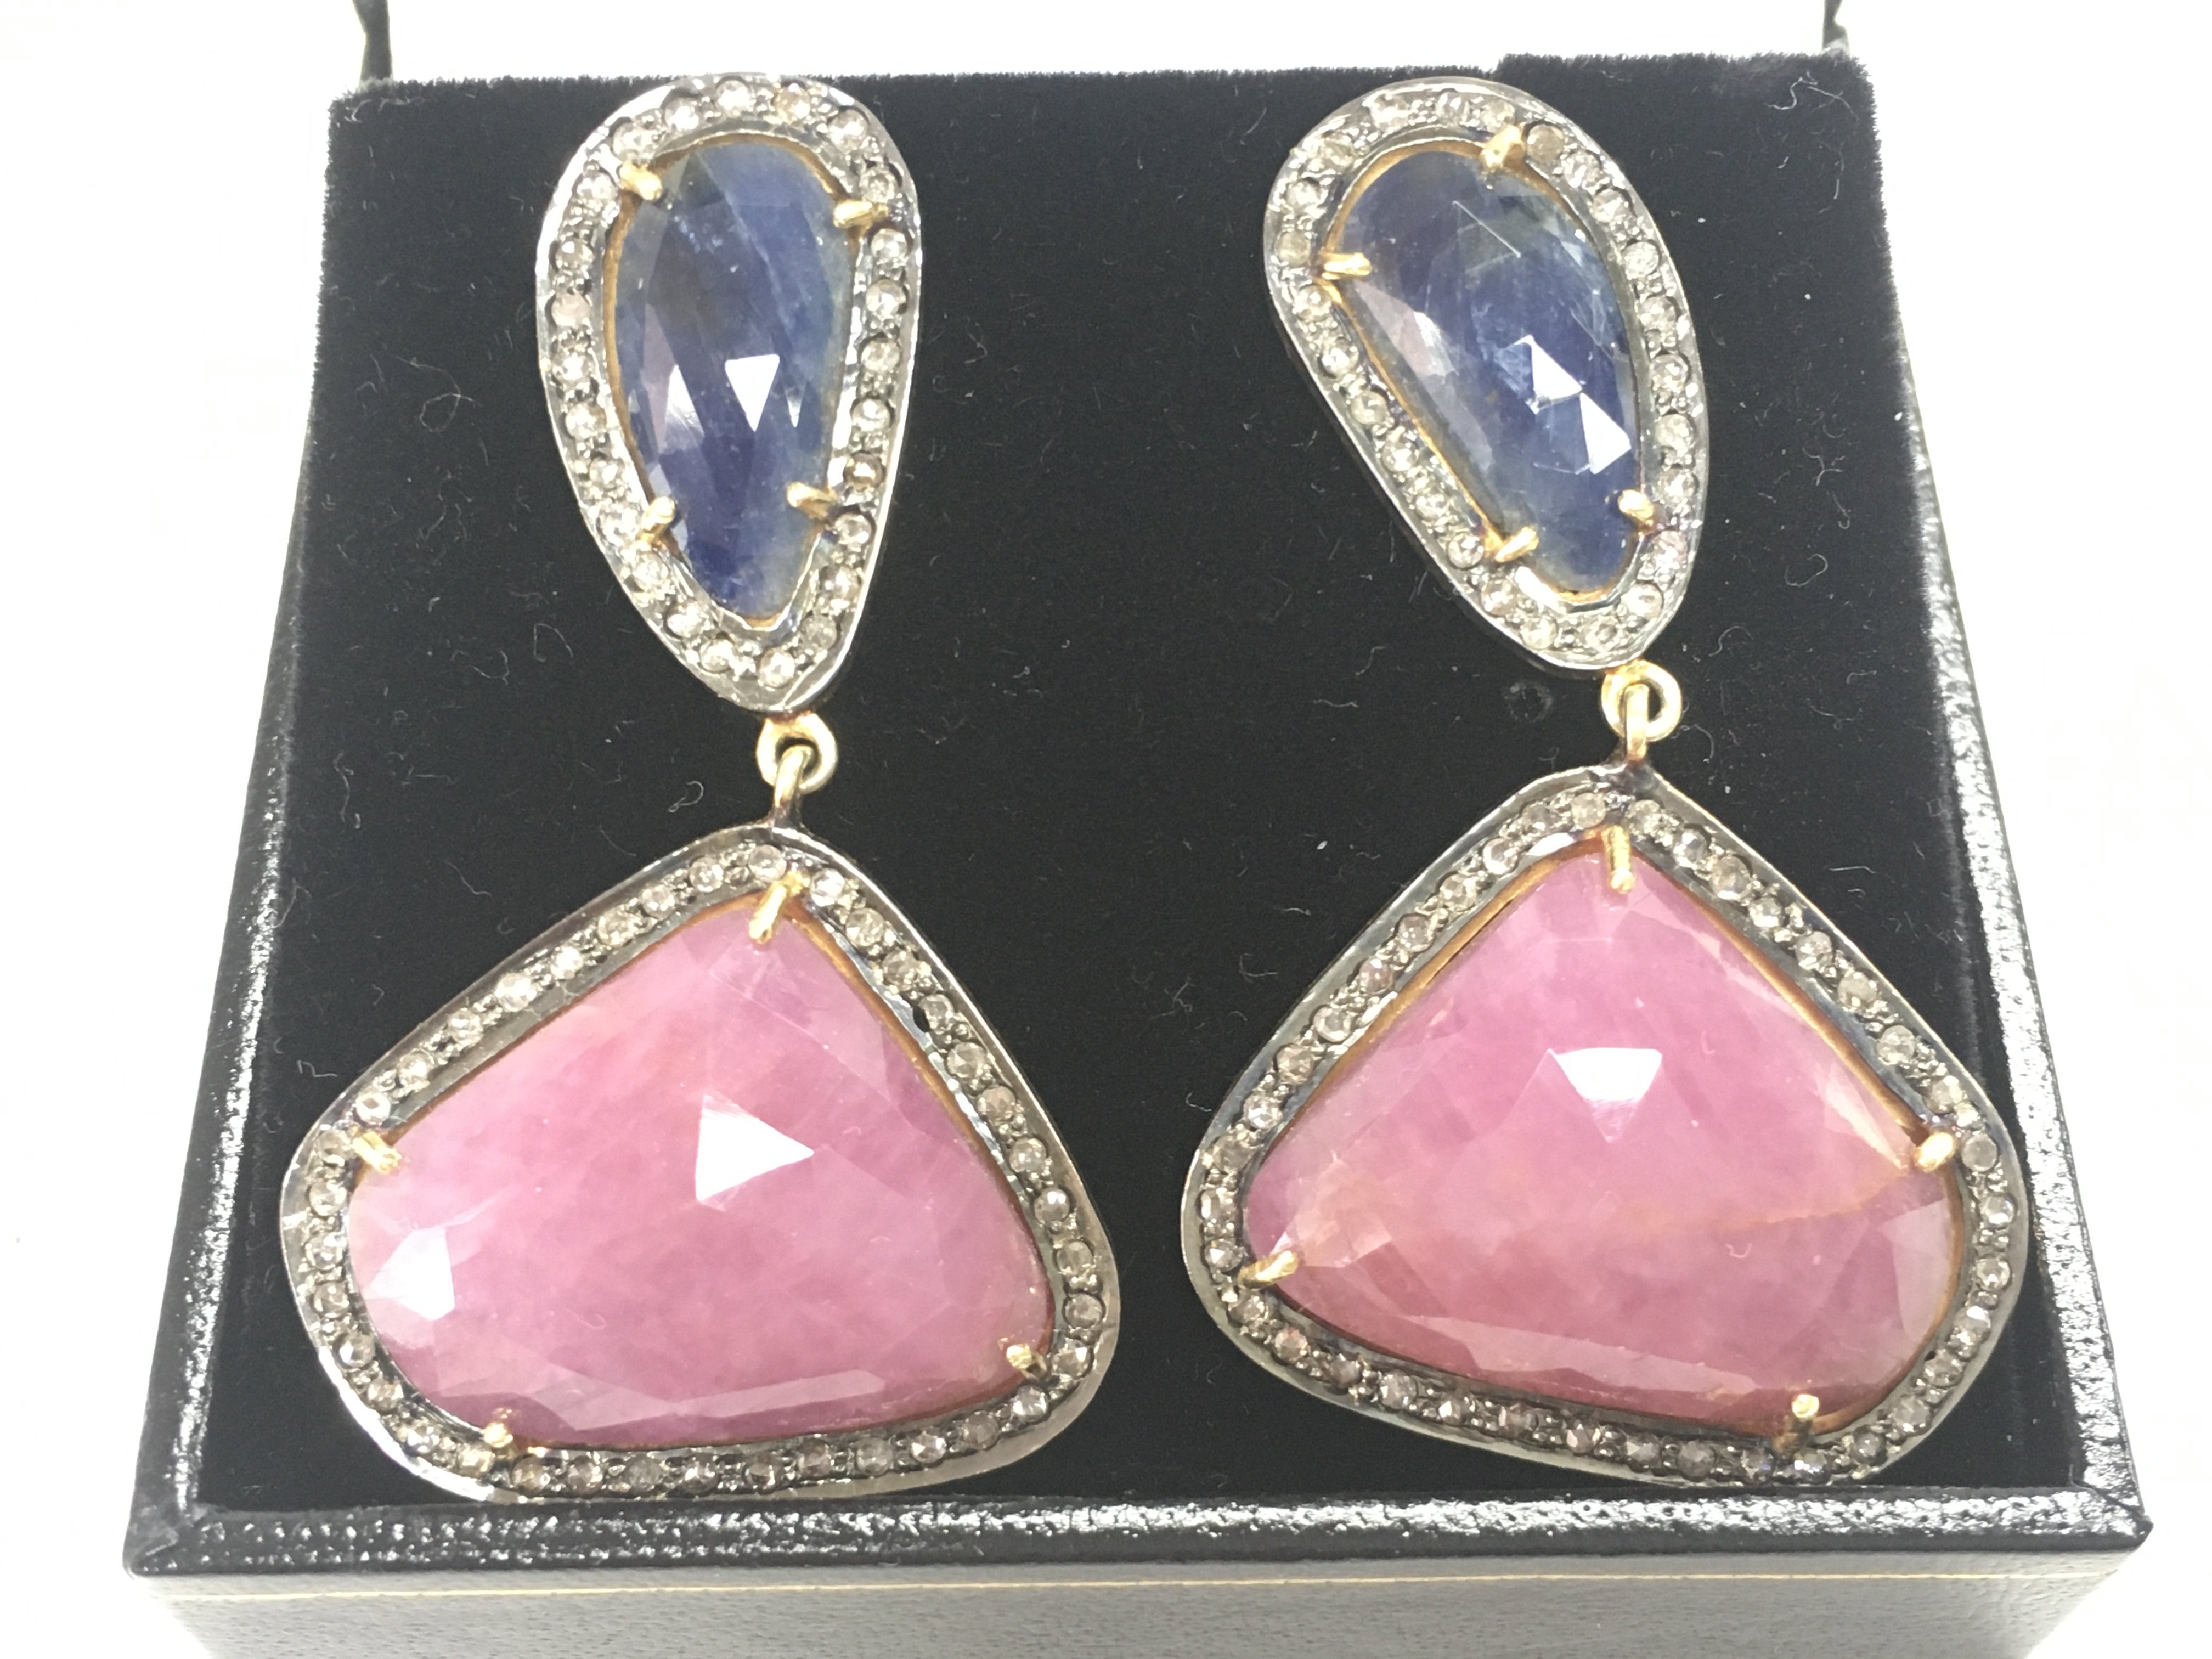 Pair of unusual drop earrings set with large, mixe